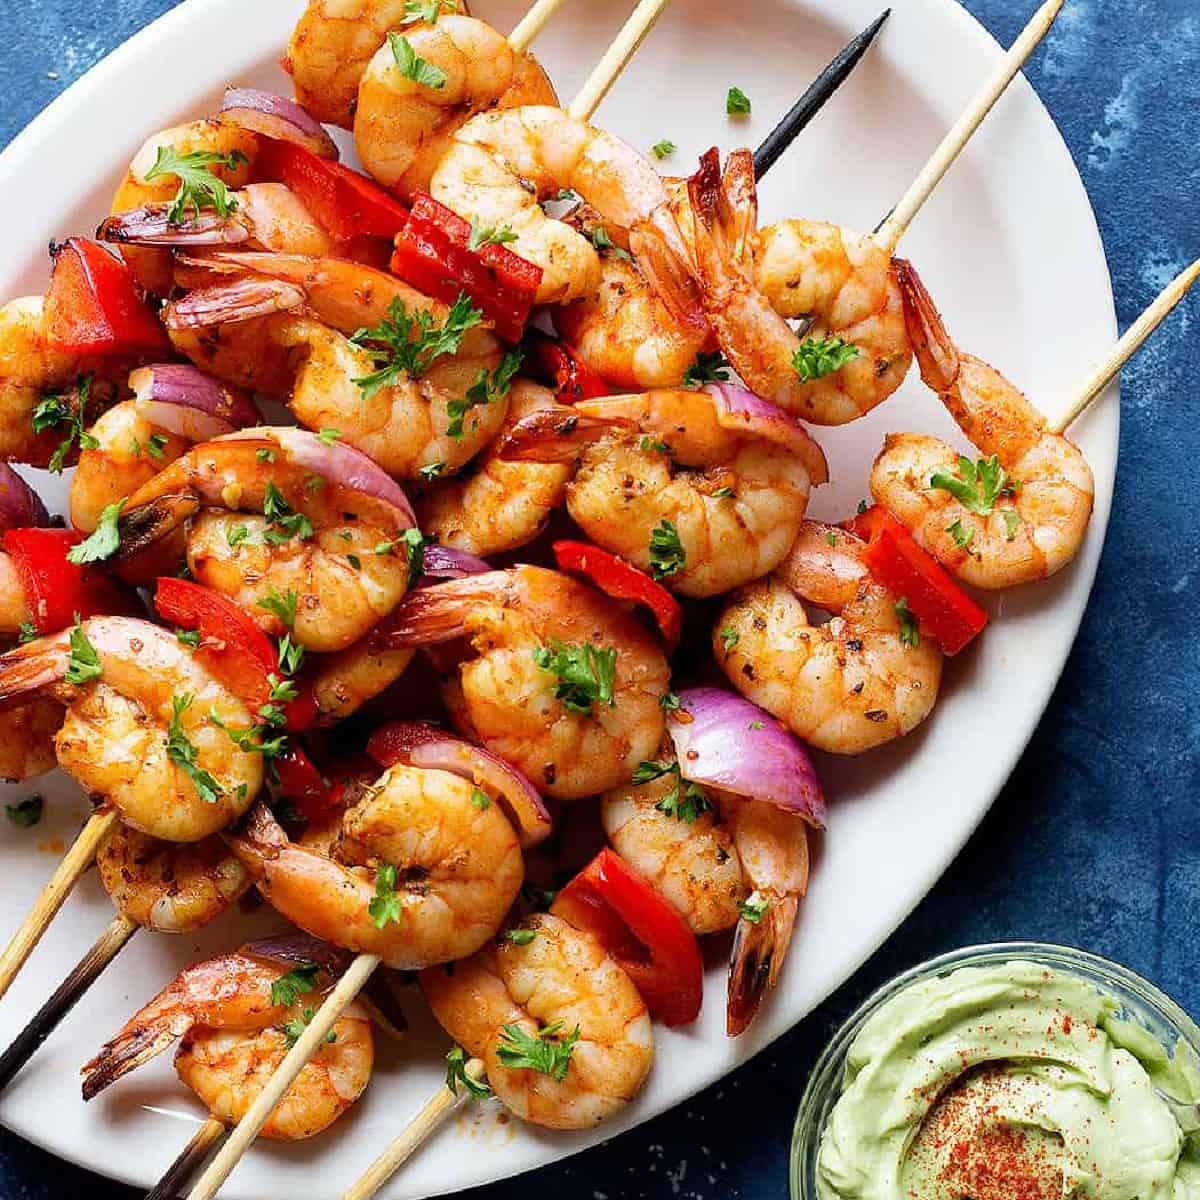 Ready in 30 minutes, these shrimp kabobs are perfect for any day of the week. This recipe is packed with flavor thanks to the best marinade!
